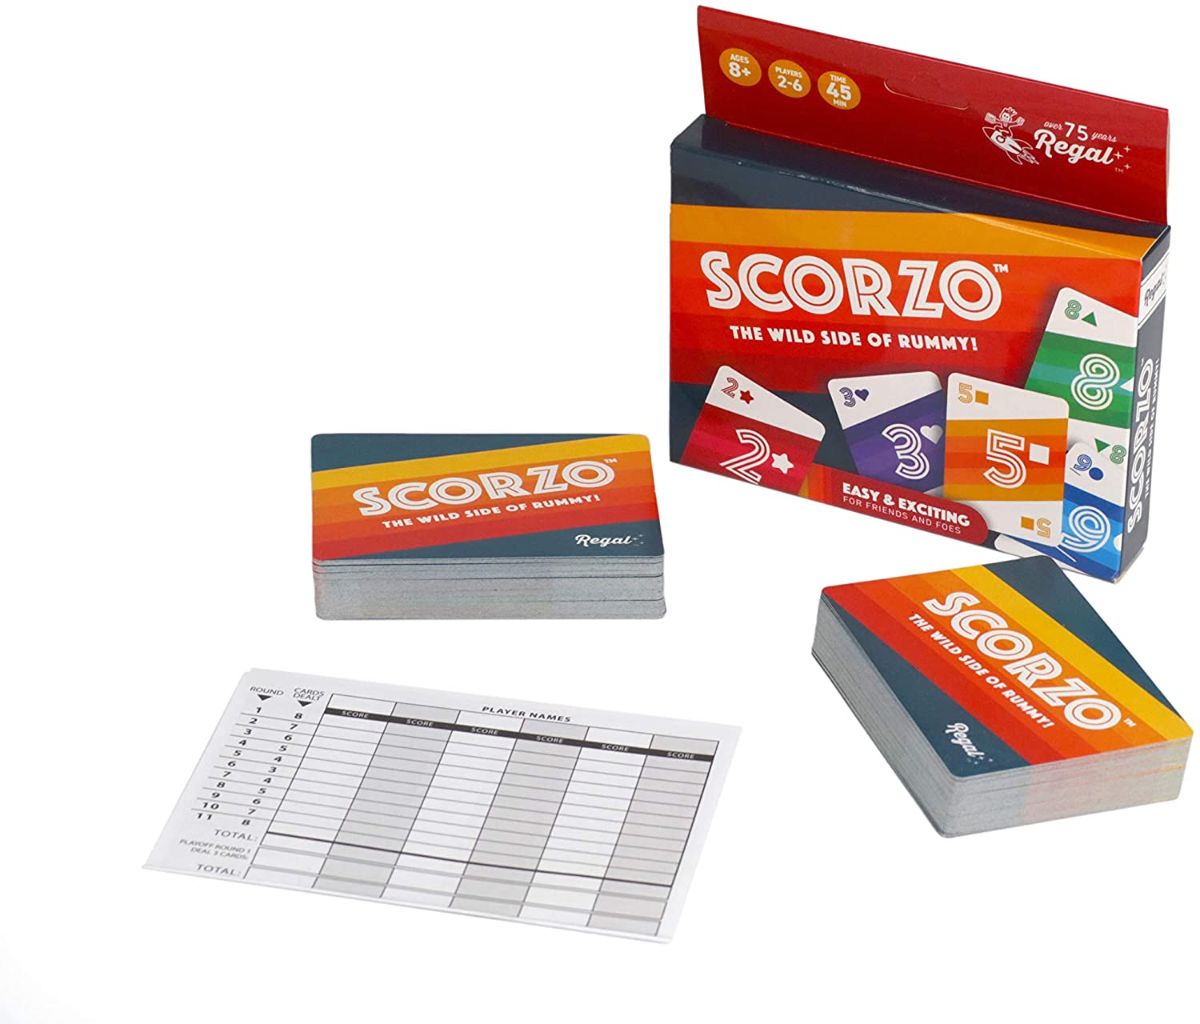 scorzo box and pages on white background